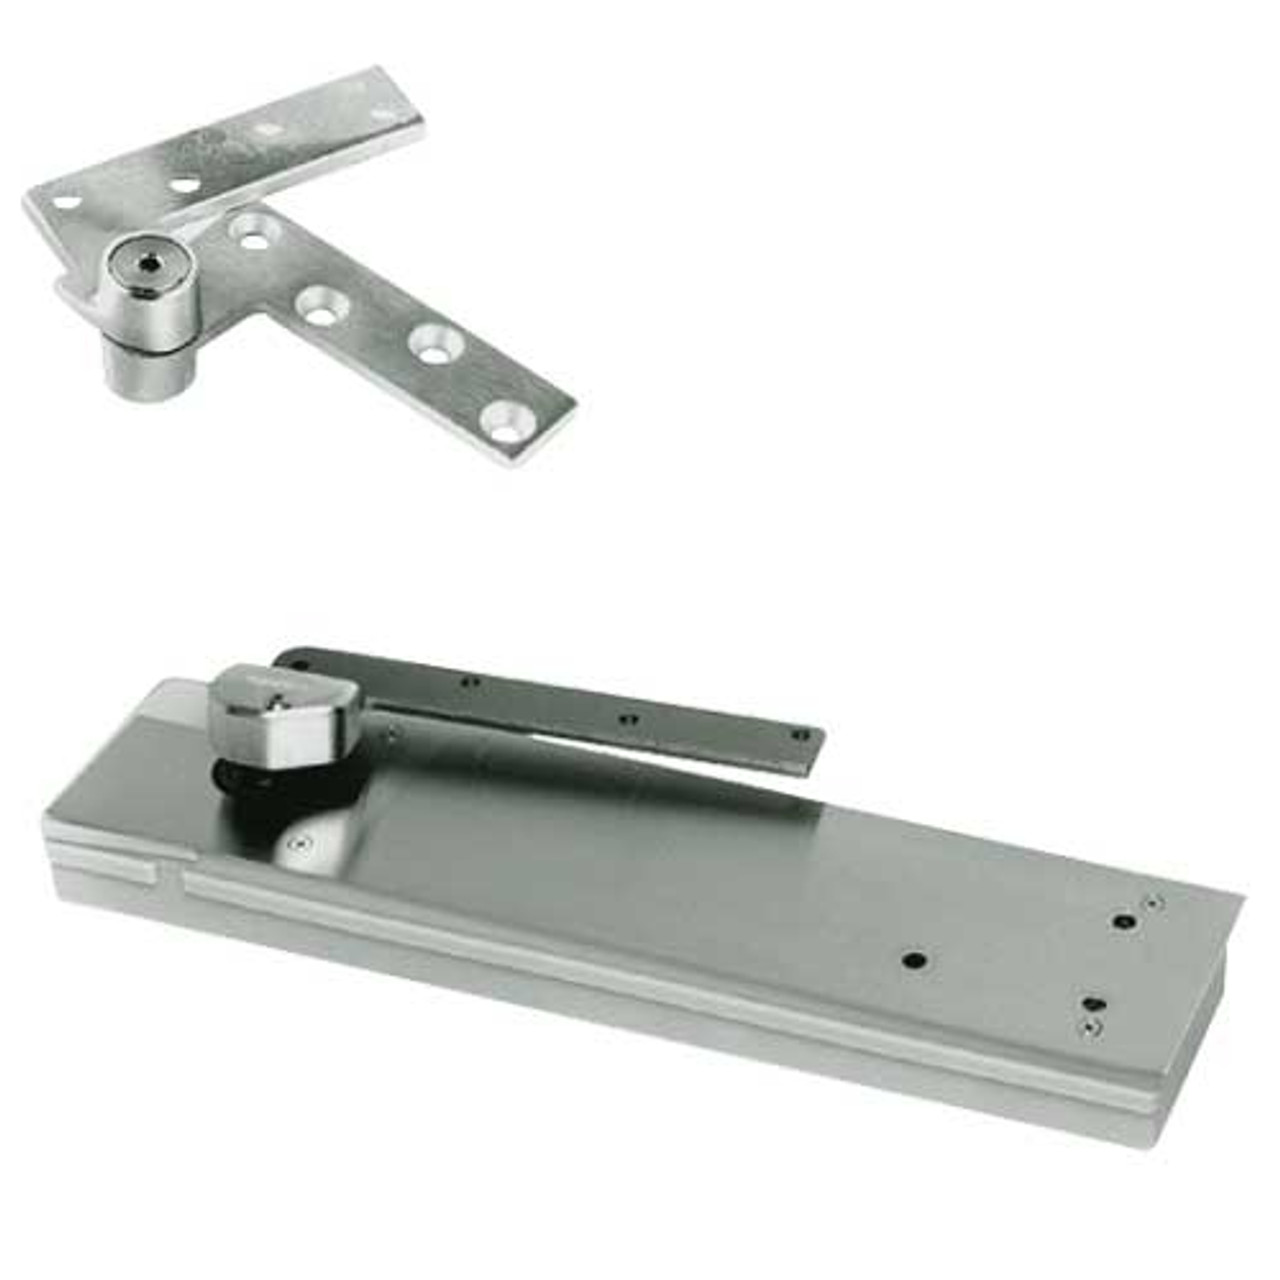 5104ABC180-1-1/2OS-RH-619 Rixson 51 Series 1-1/2" Offset Hung Shallow Depth Floor Closers in Satin Nickel Finish